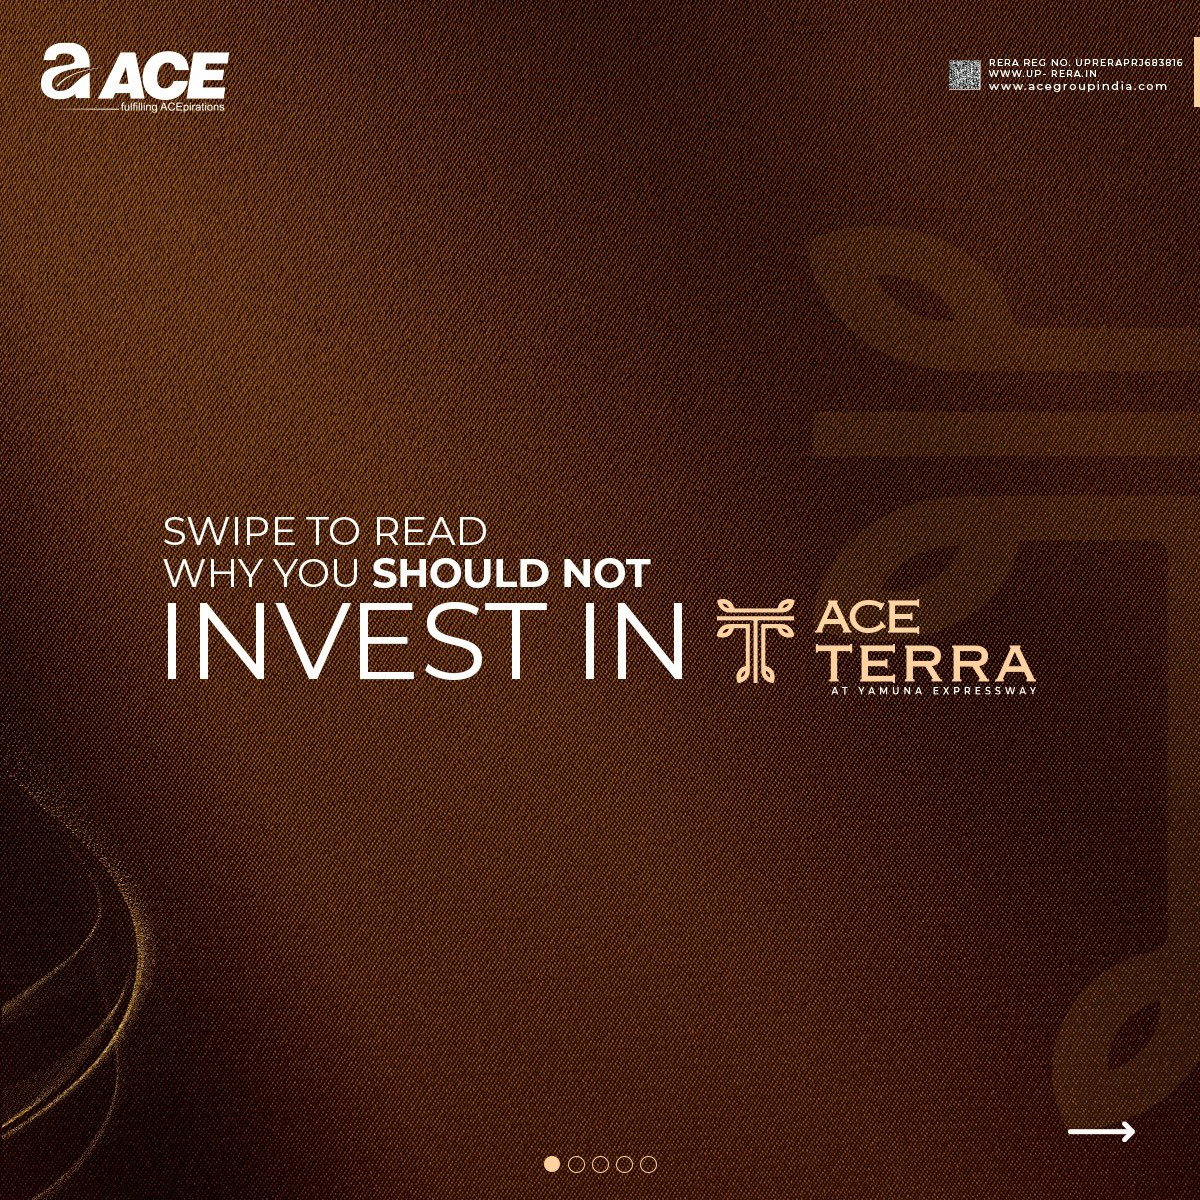 THERE ARE NO REASONS! Period

To know more, visit: acegroupindia.com/ace-terra.php
RERA REG NO. UPRERAPRJ683816 | UP-RERA.IN

#ReasonsToInvest #AceTerra #YamunaExpressway #ResidentialProjects #AceGroup #AceGroupIndia #realestate #AceLife #luxurylifestyle #RealEstatelndia